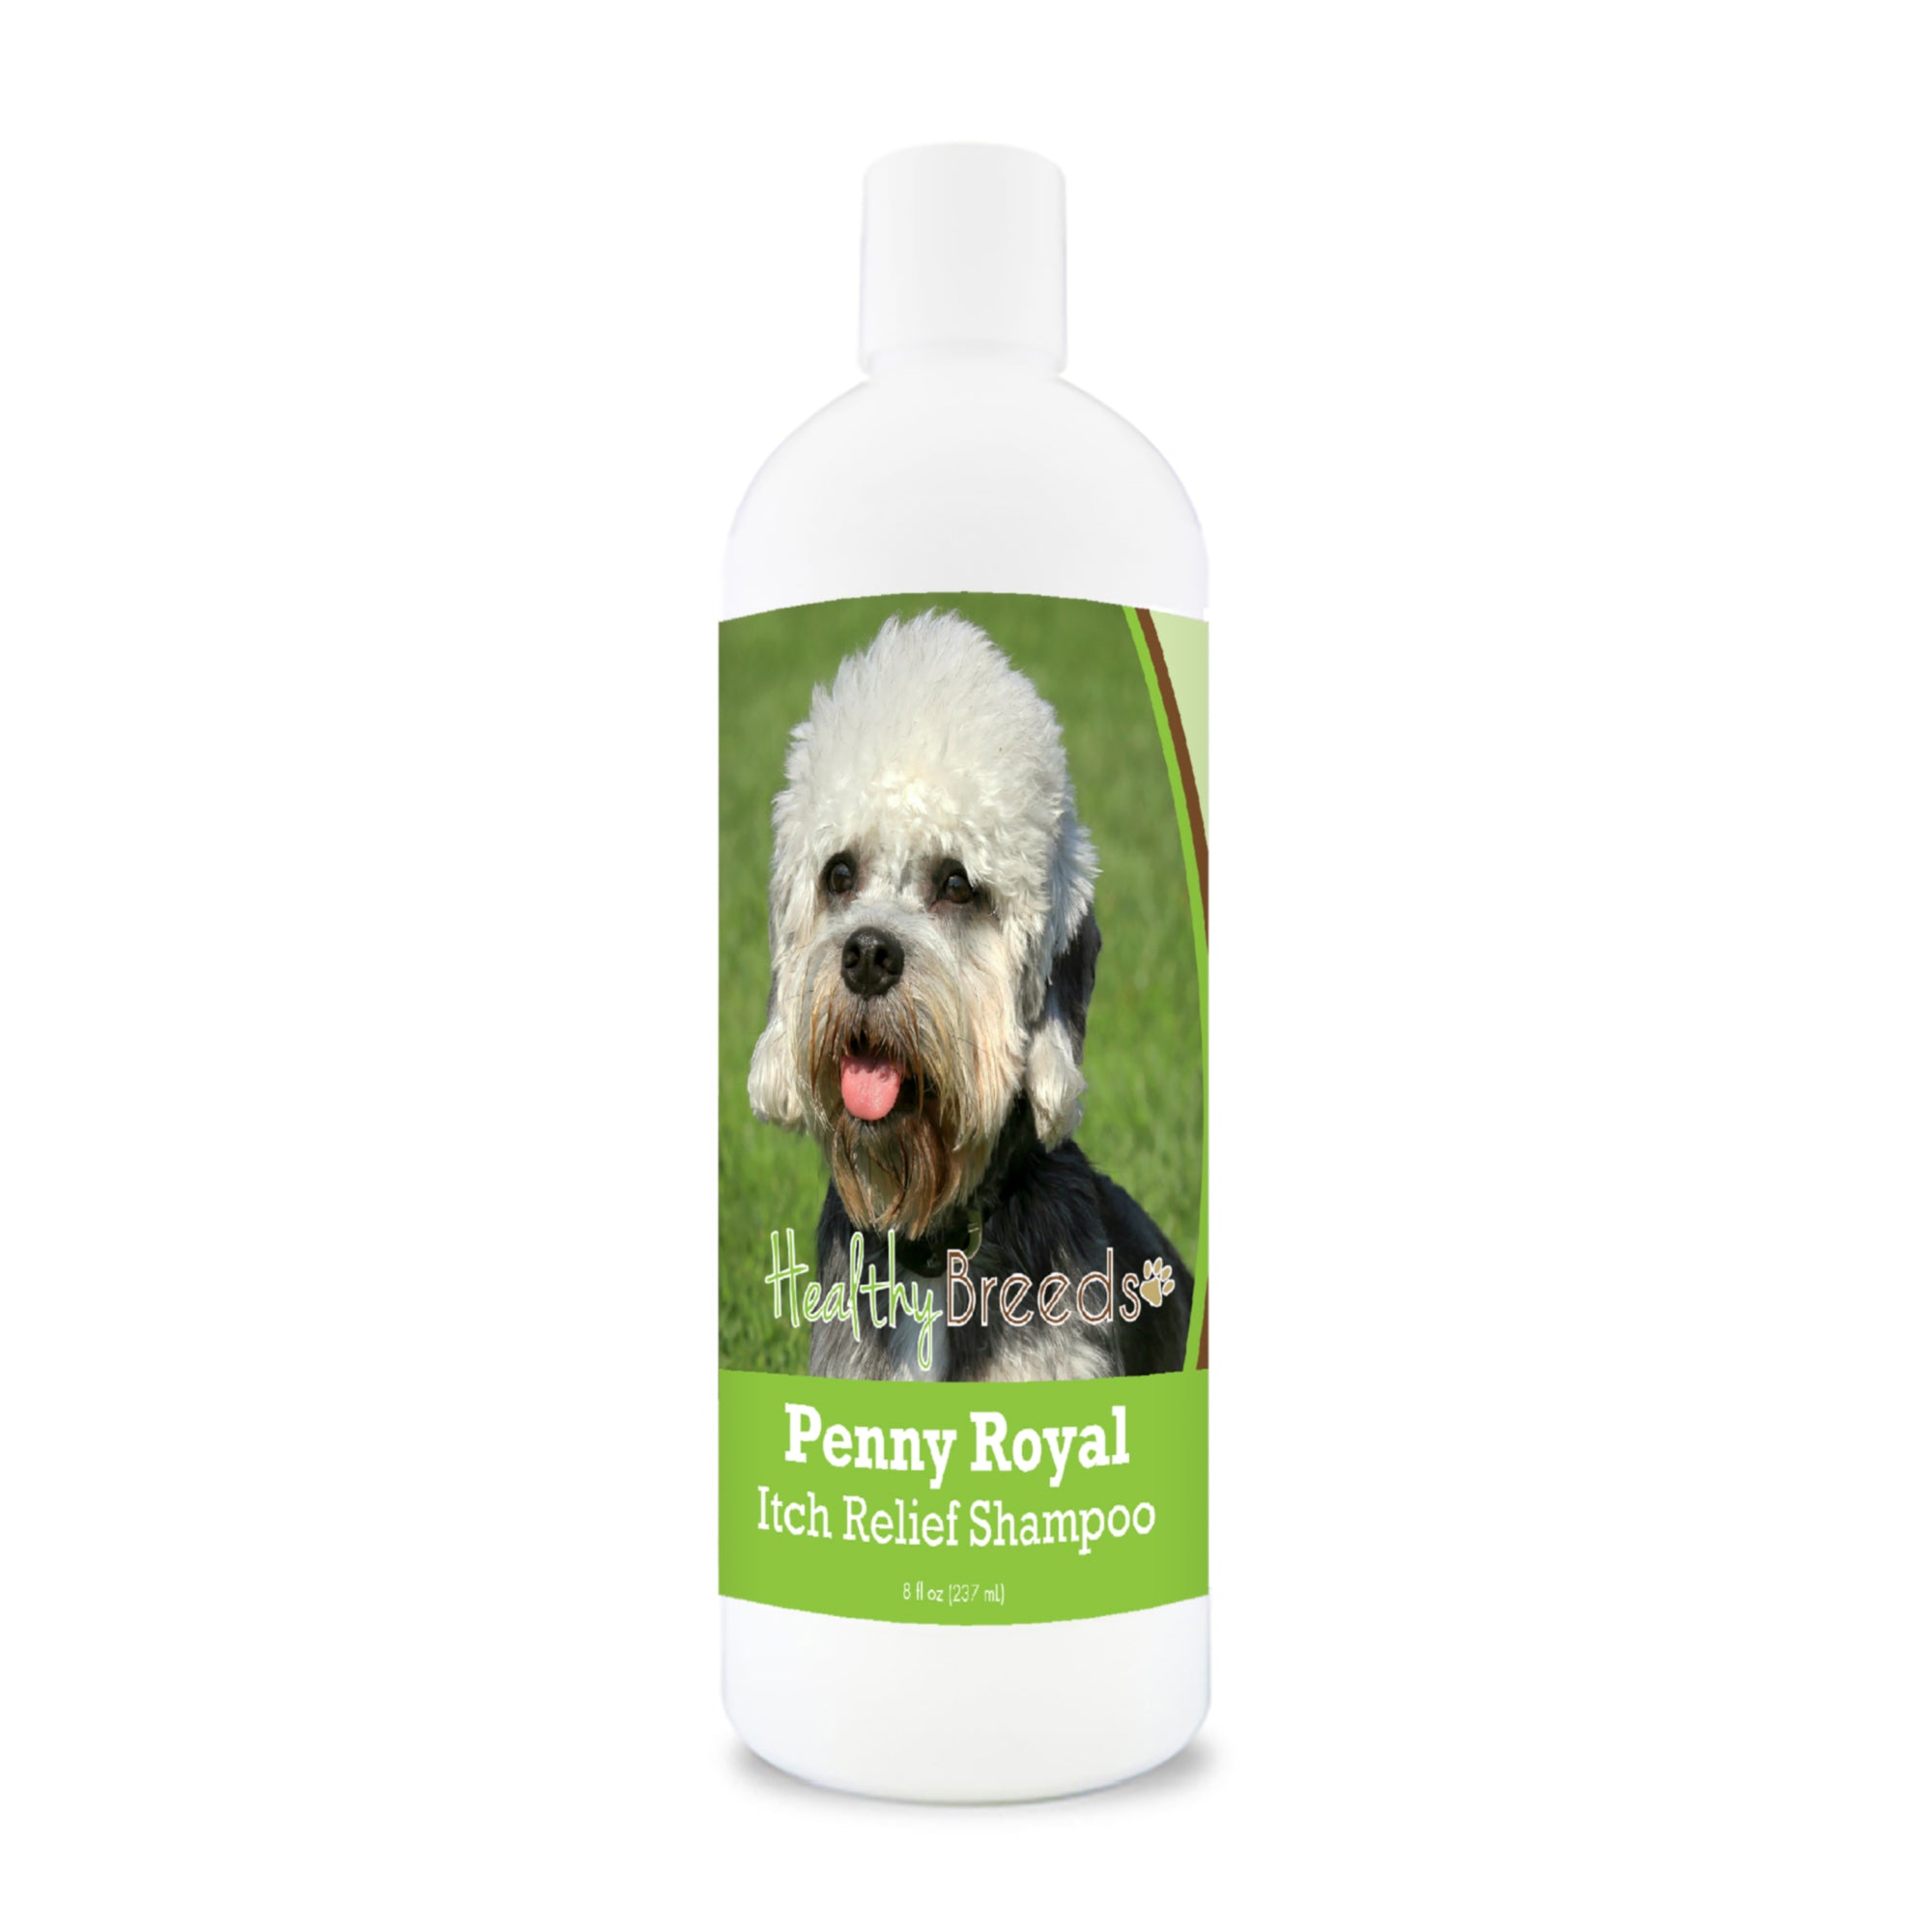 Dandie Dinmont Terrier Penny Royal Itch Relief Shampoo 8 oz